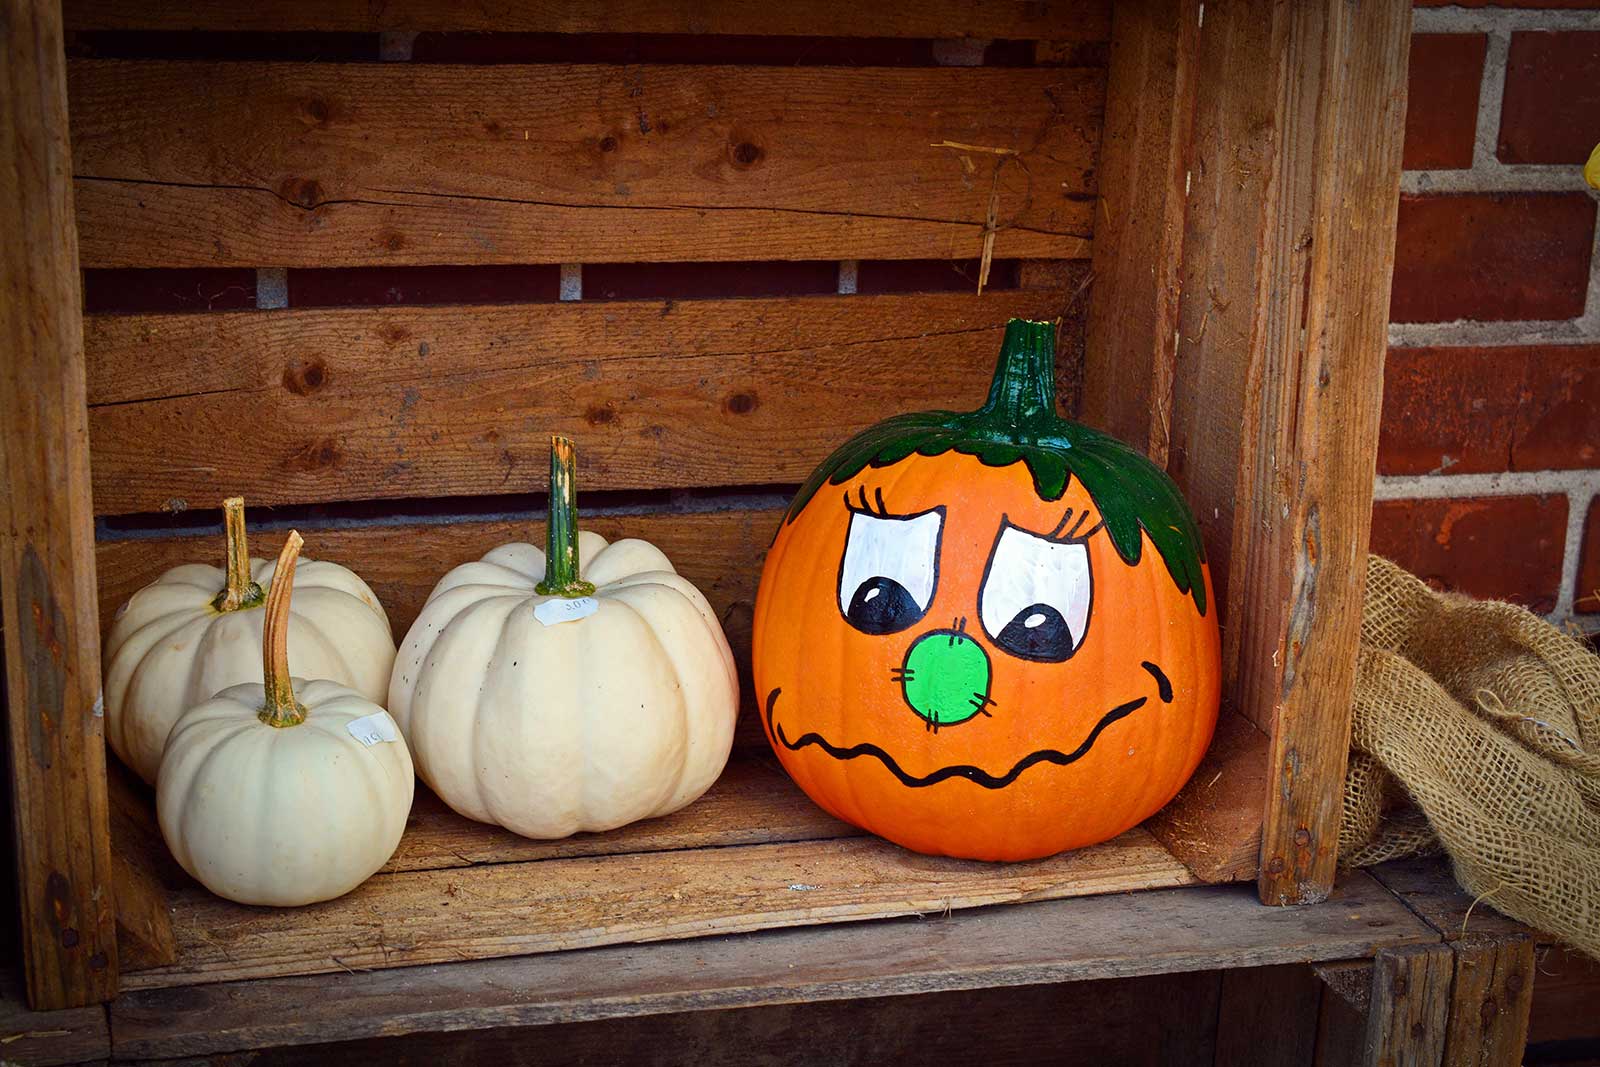 Painted Pumpkins and Autumn Decor at Goffle Brook Farms